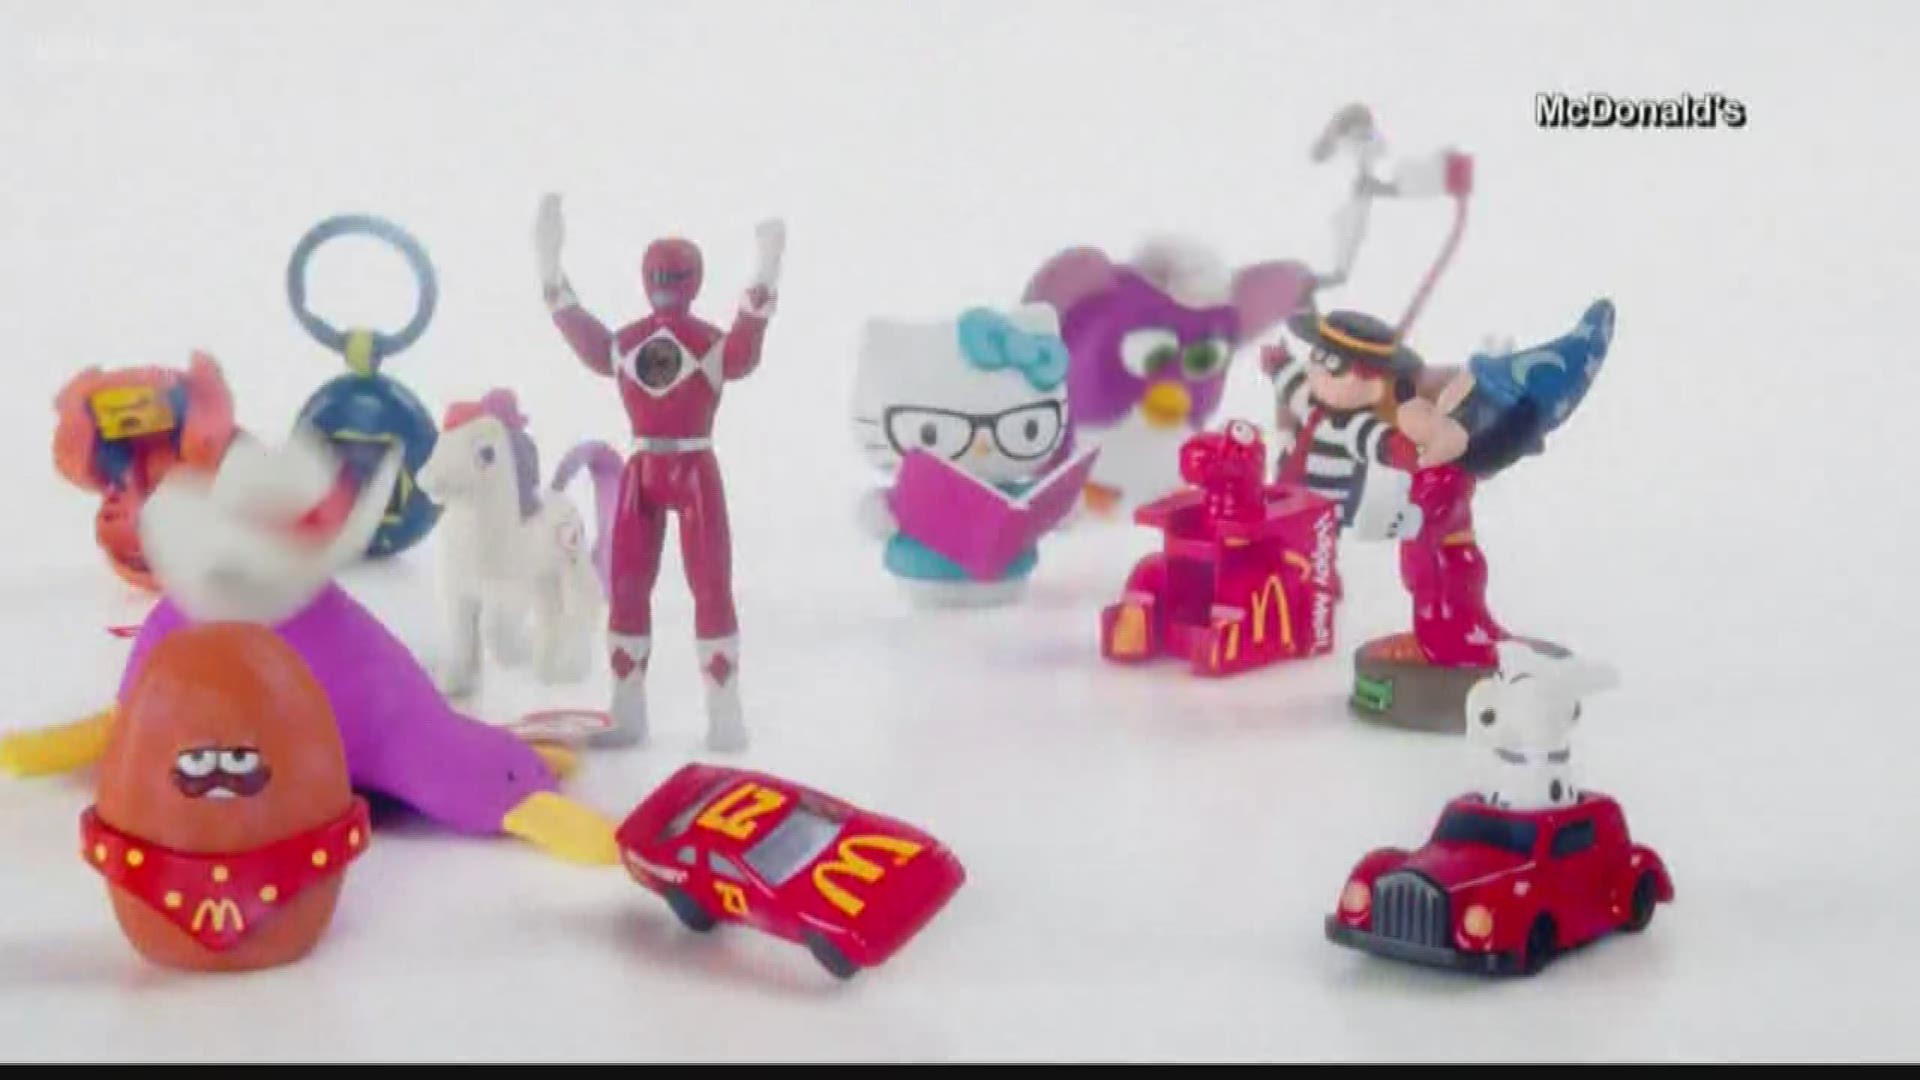 McDonald's is bringing back some of the most popular Happy Meal toys of all time.